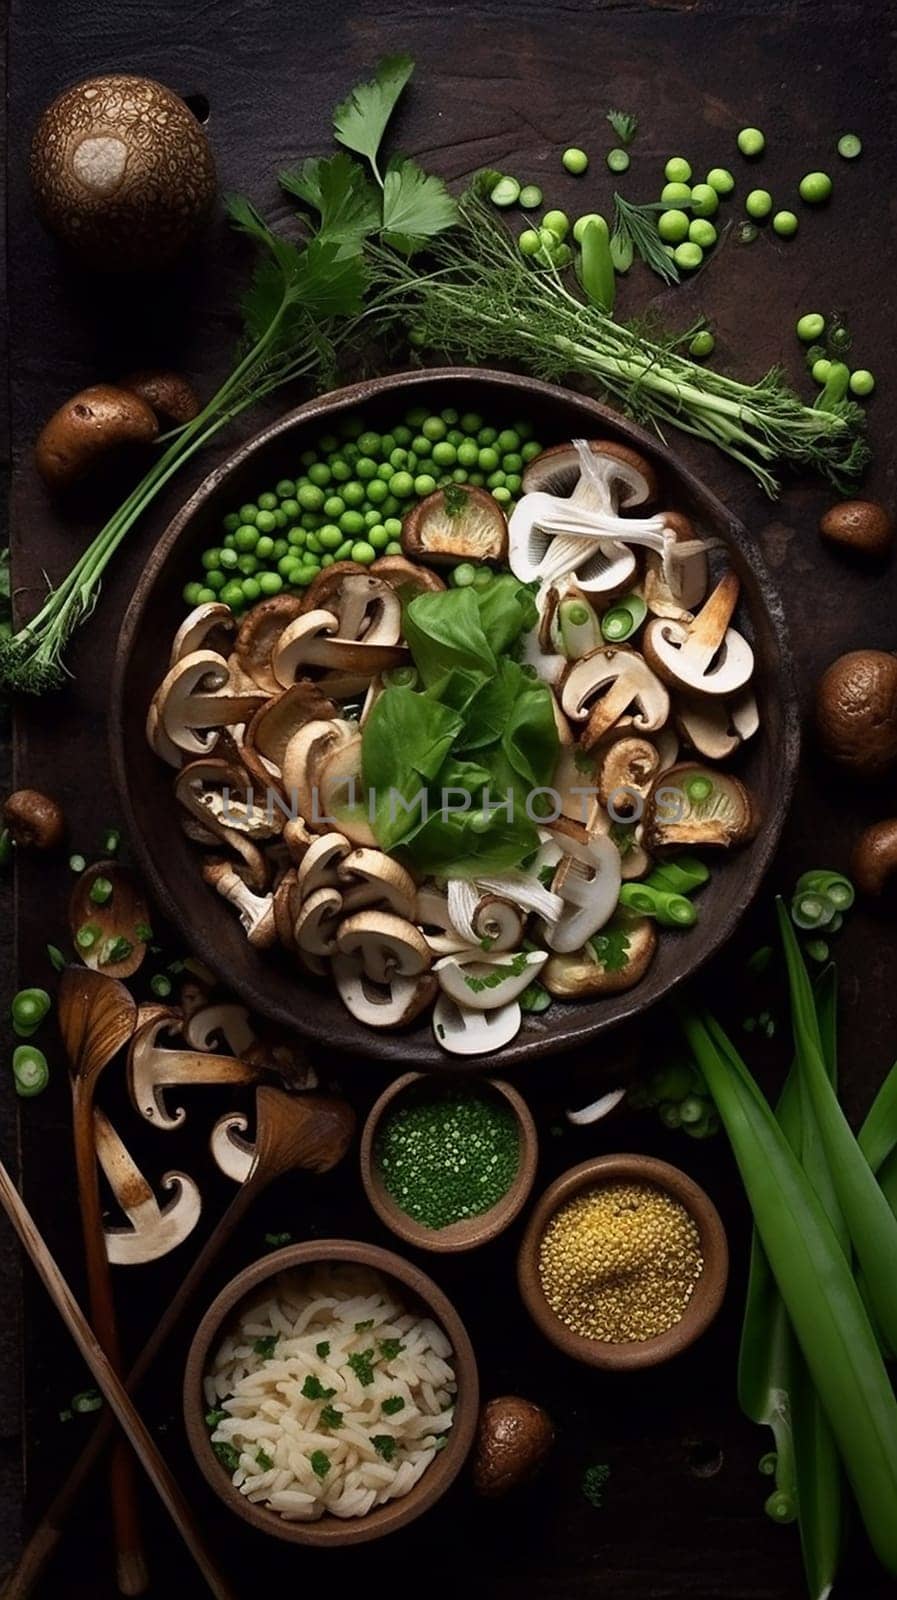 Assorted fresh vegetables and herbs arranged artfully on a dark background. by Hype2art